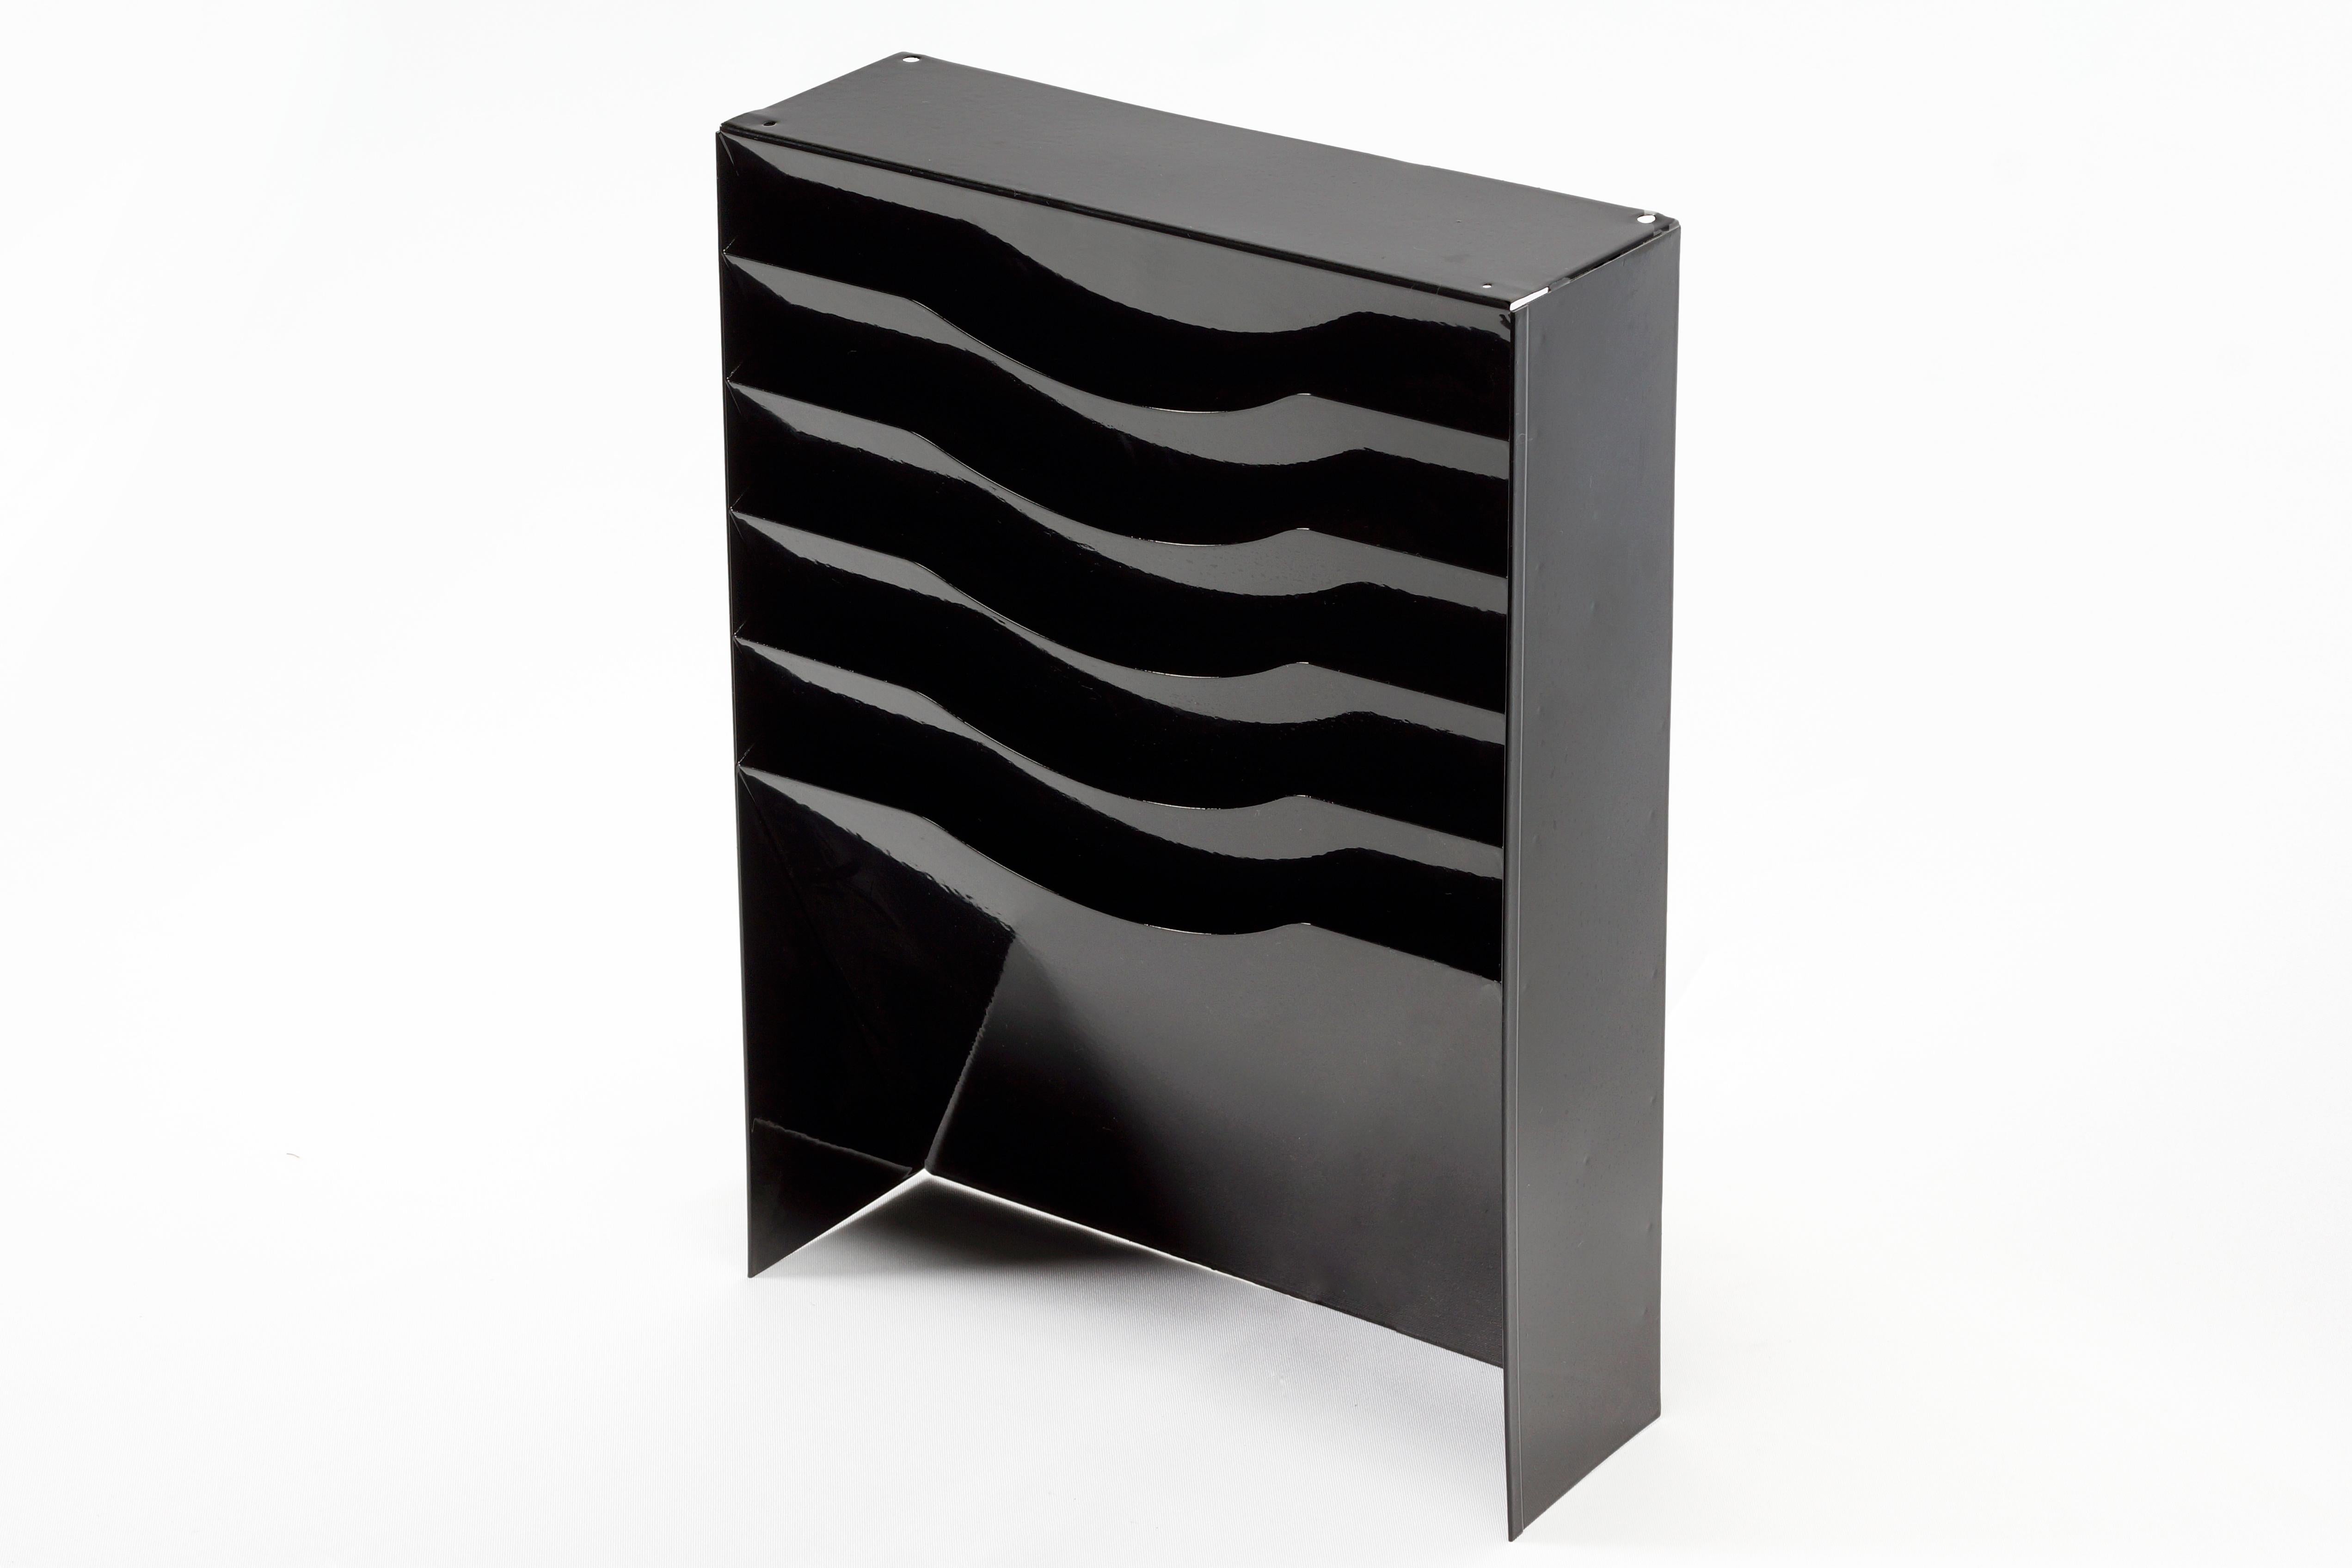 Vintage file holder or magazine rack refinished in gloss black powder coat. Once the drawer insert to a tanker piece, we repurposed it for versatile use. This functional, retro style piece is perfect for getting any home or office organized. Easily